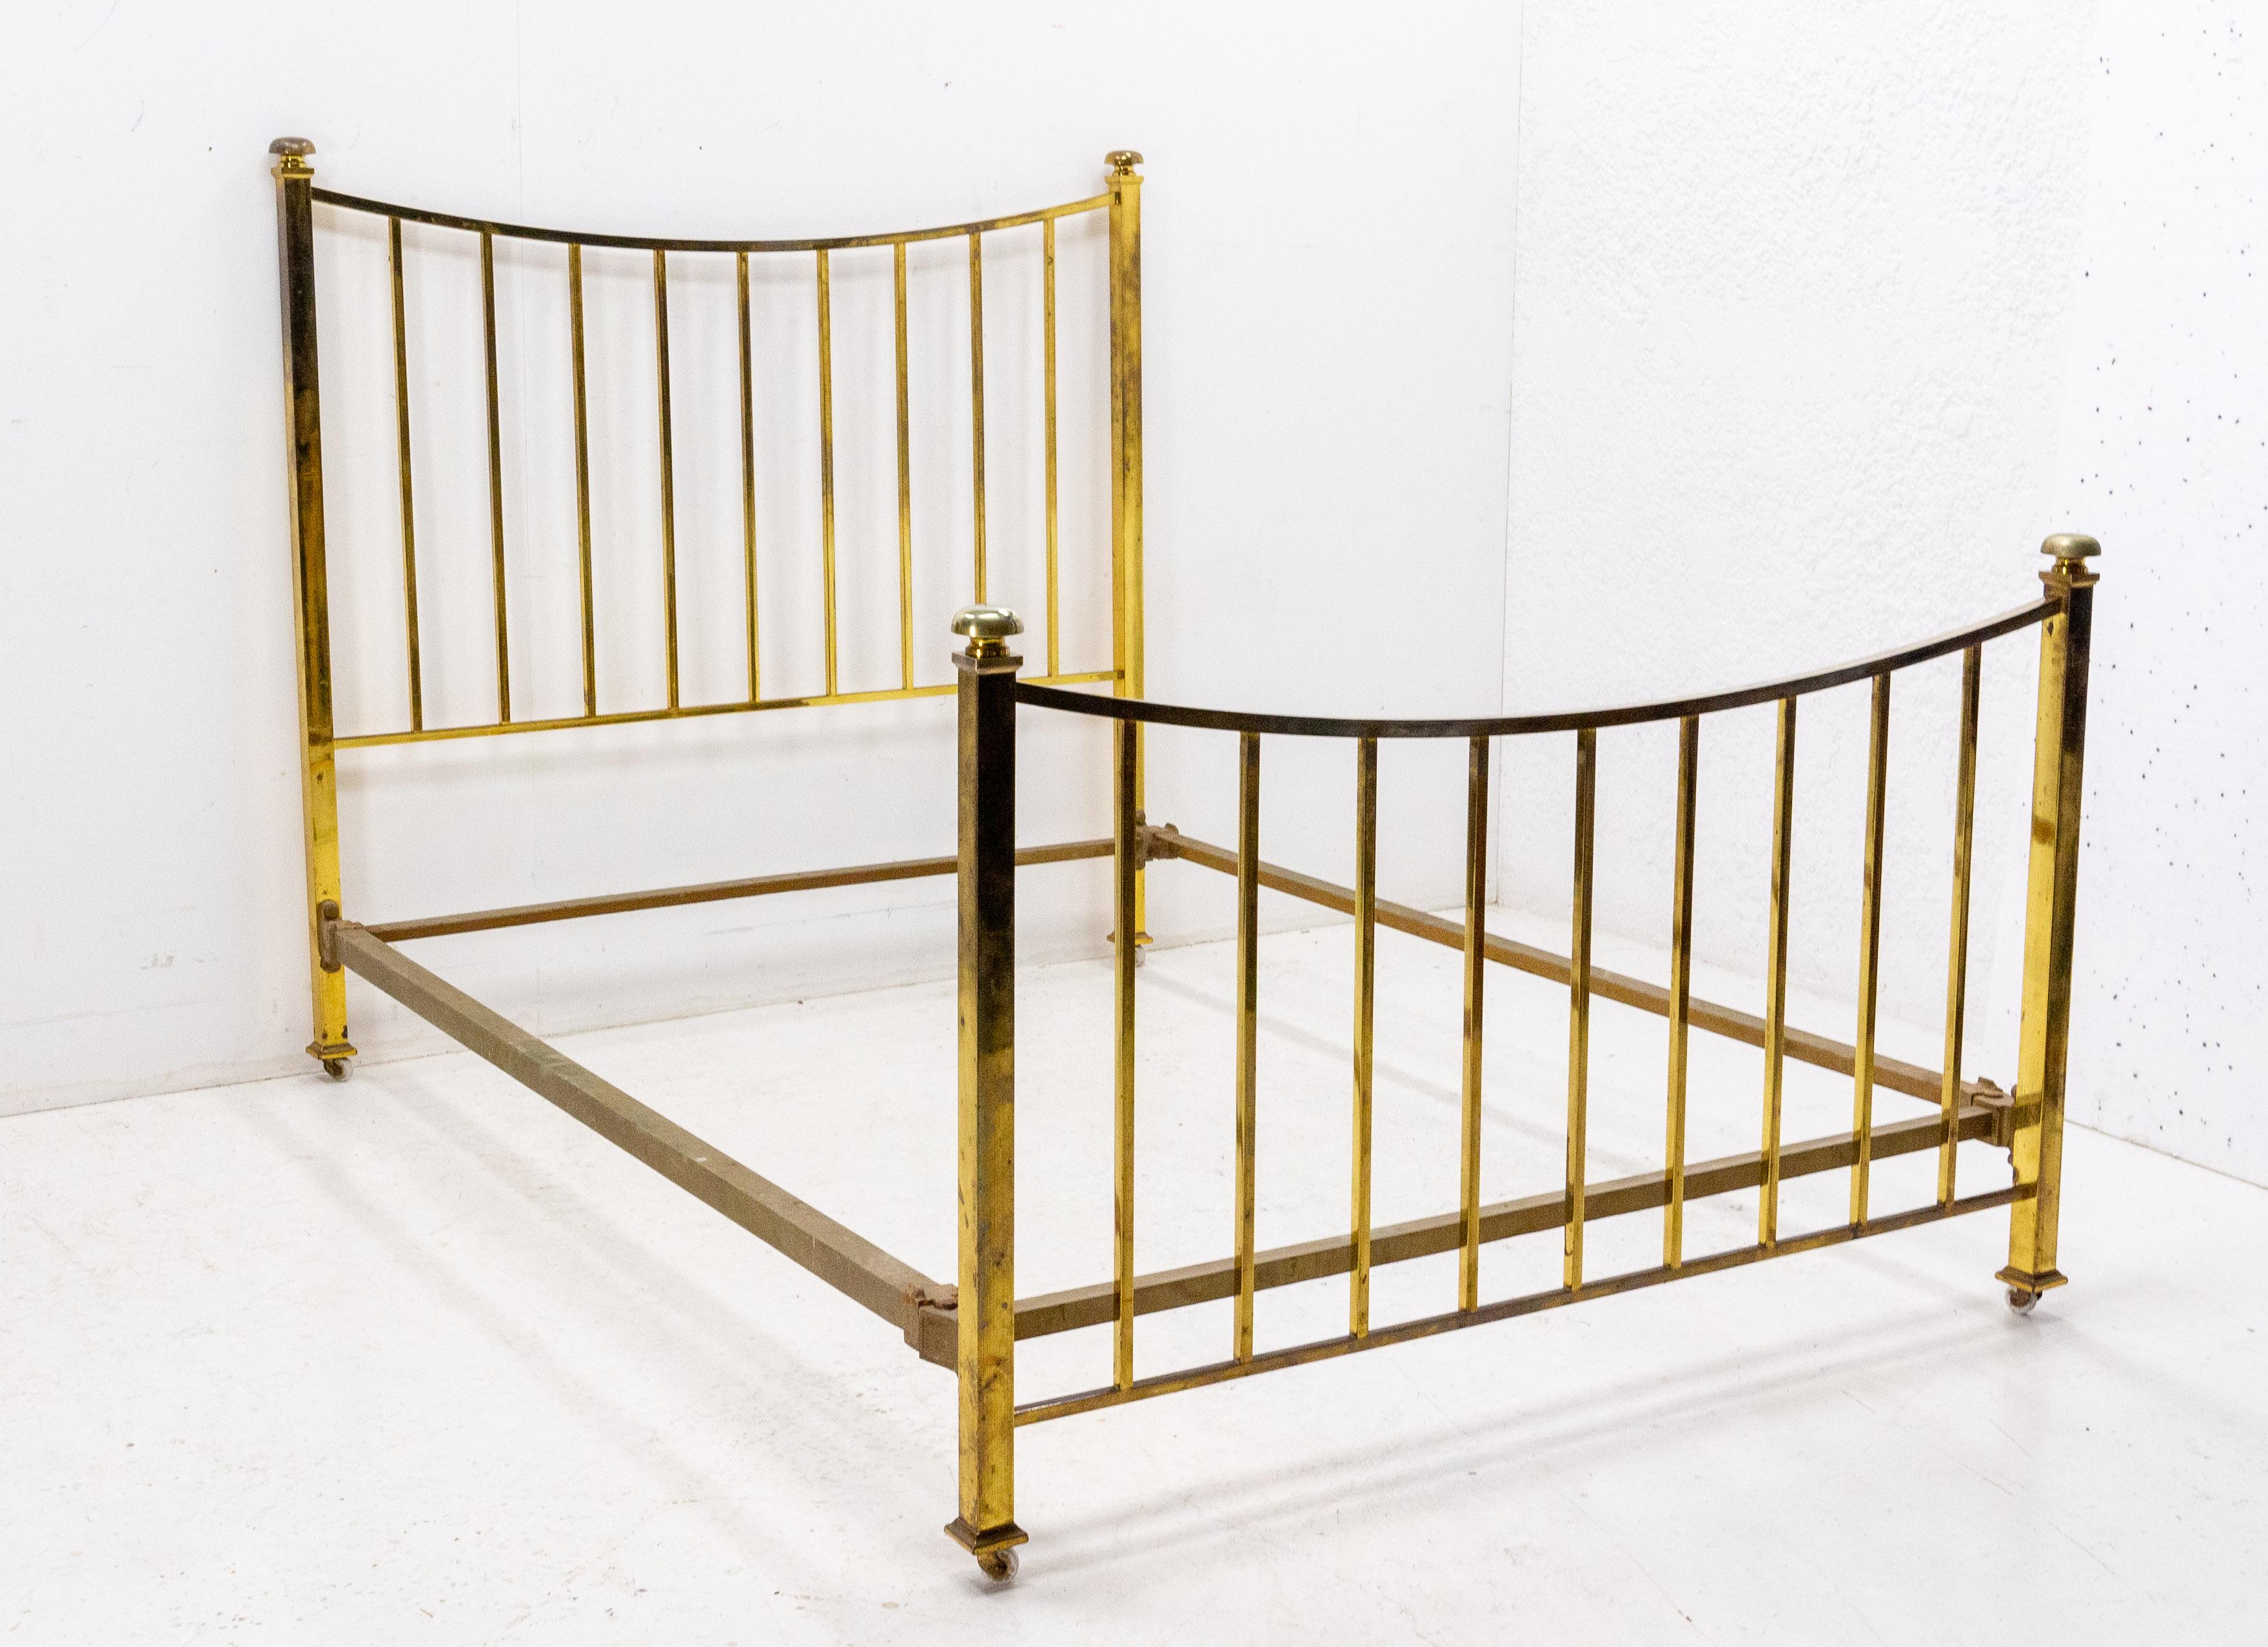 French Art Deco bed US Double bed and UK full size
Massive brass
This will take a standard US double bed size or UK full size mattress on either a slatted wood base or bunkie box base, if bedding is placed on the side bars.
Good vintage condition